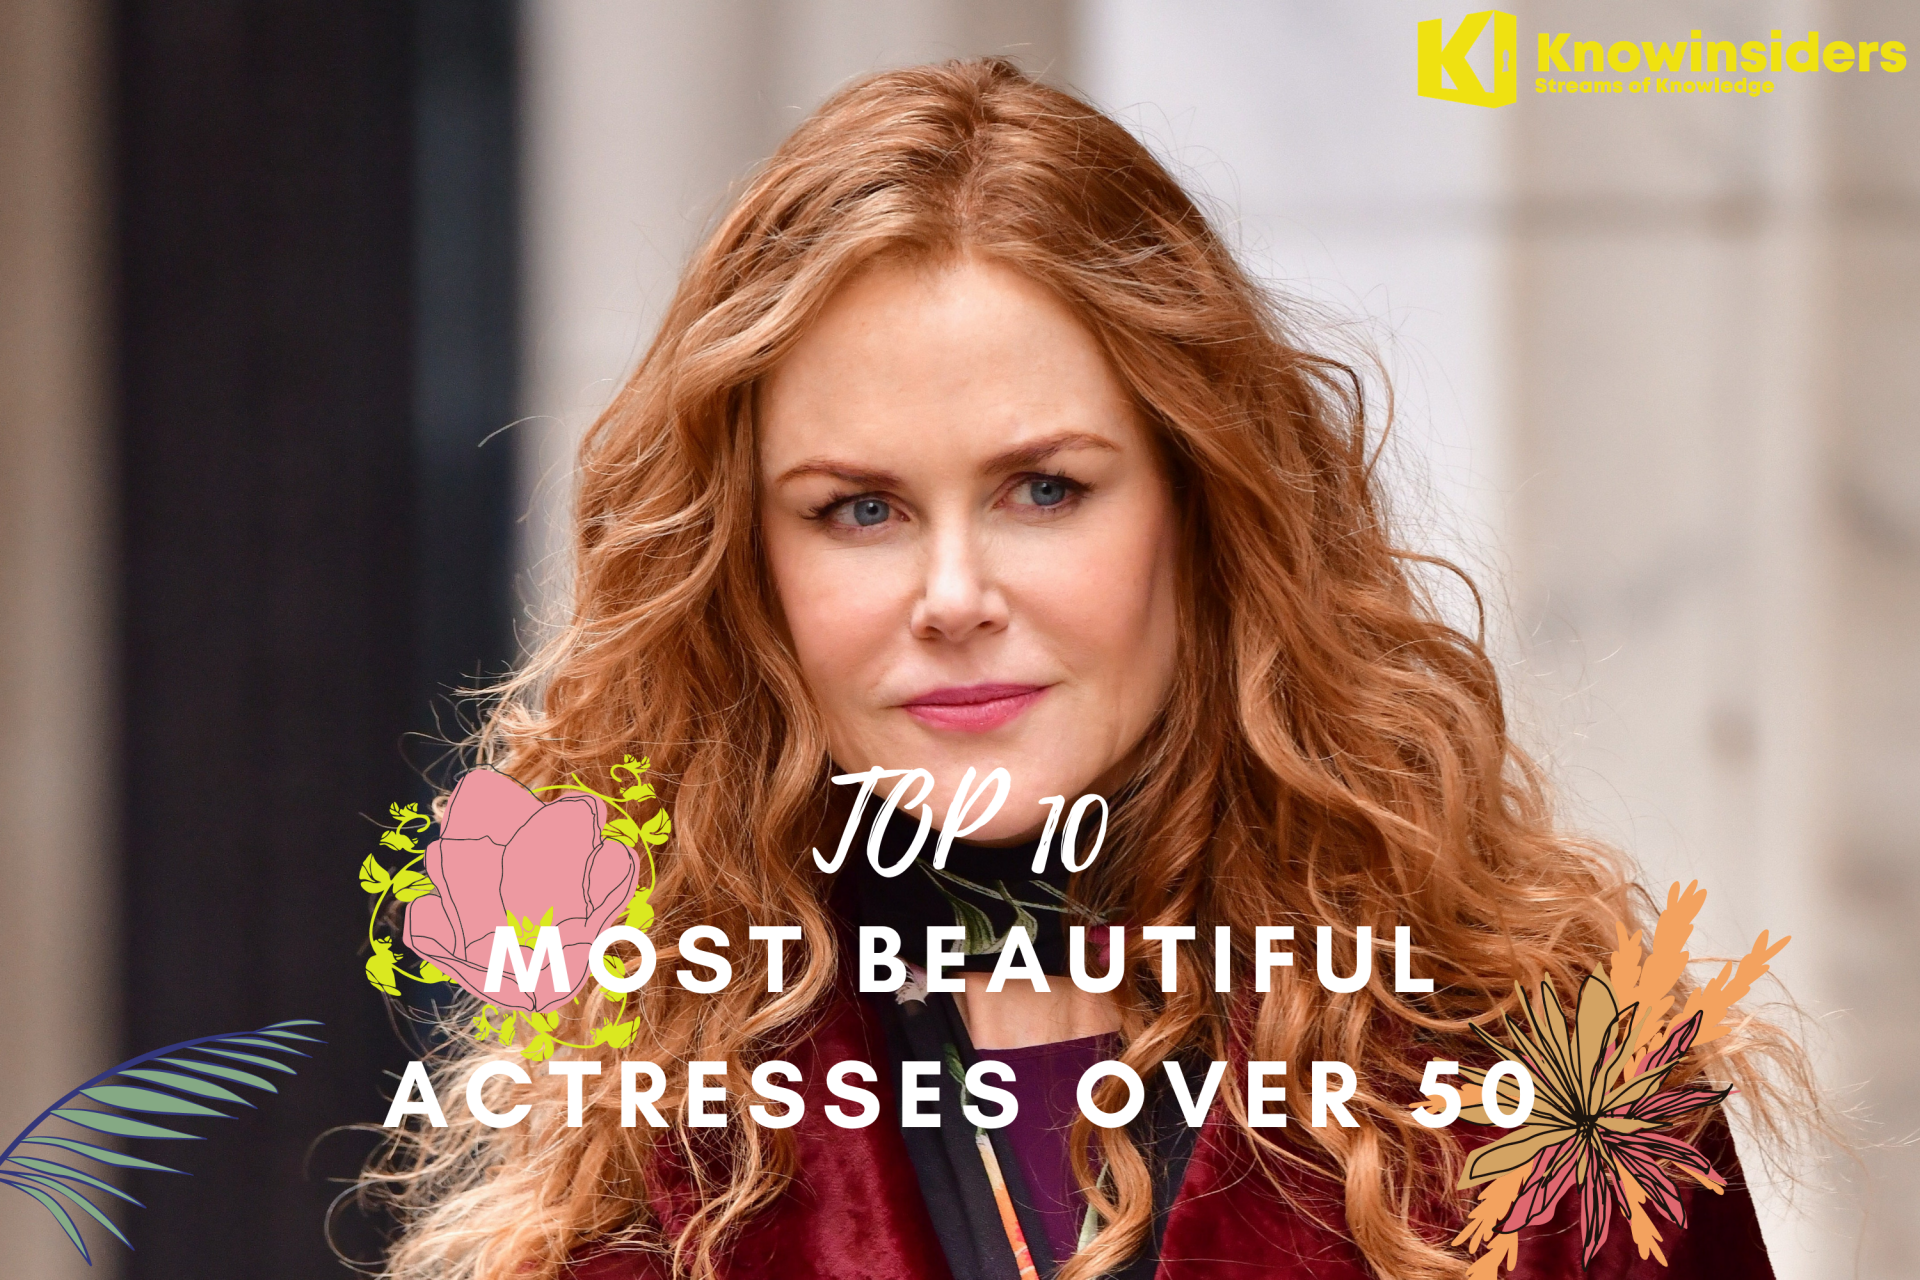 TOP 10 Most Beautiful Actresses Over 50